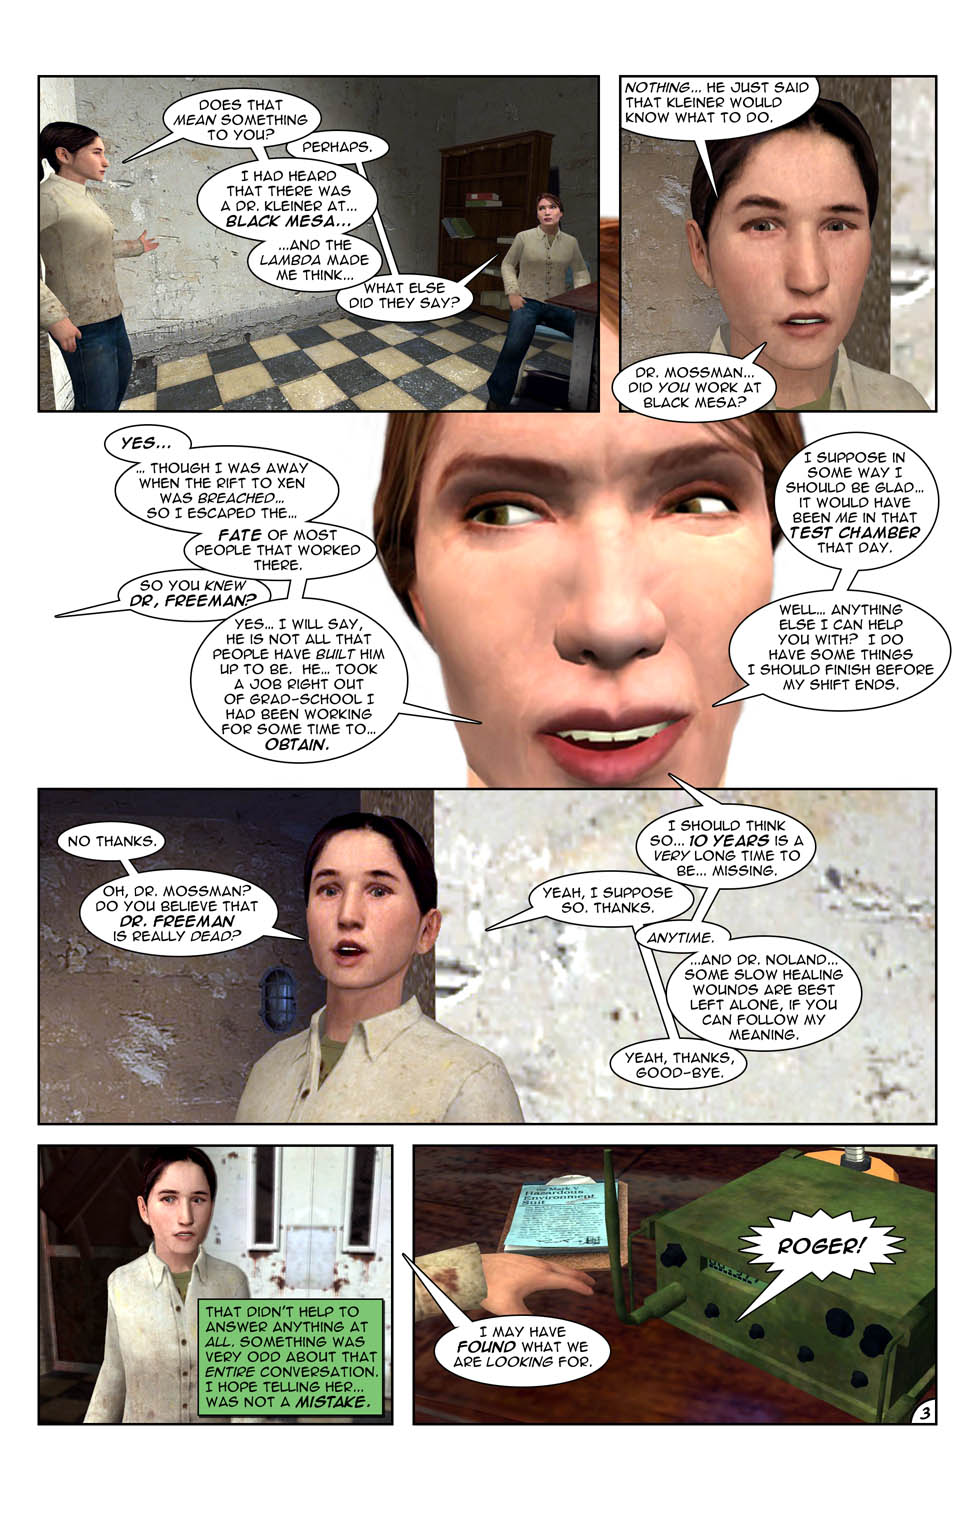 Galena asks Doctor Mossman if the lambda means anything to her. The doctor evades the question with a perhaps. She then asks further questions about what Galena knows, making her suspicious in turn. Galena asks about Black Mesa and Judith explains how she was away on the day of the Black Mesa Incident that opened a portal to an alien dimension. She then says she has to end her shift and Galena finishes with a question if Doctor Mossman thinks Doctor Freeman is dead, to which she replies ten years is a long time to be missing. Galena leaves with some parting words from Doctor Mossman and feeling that maybe telling her was a mistake. Judith then turns on her radio transmitter and sends a message saying she may have found what they are looking for.